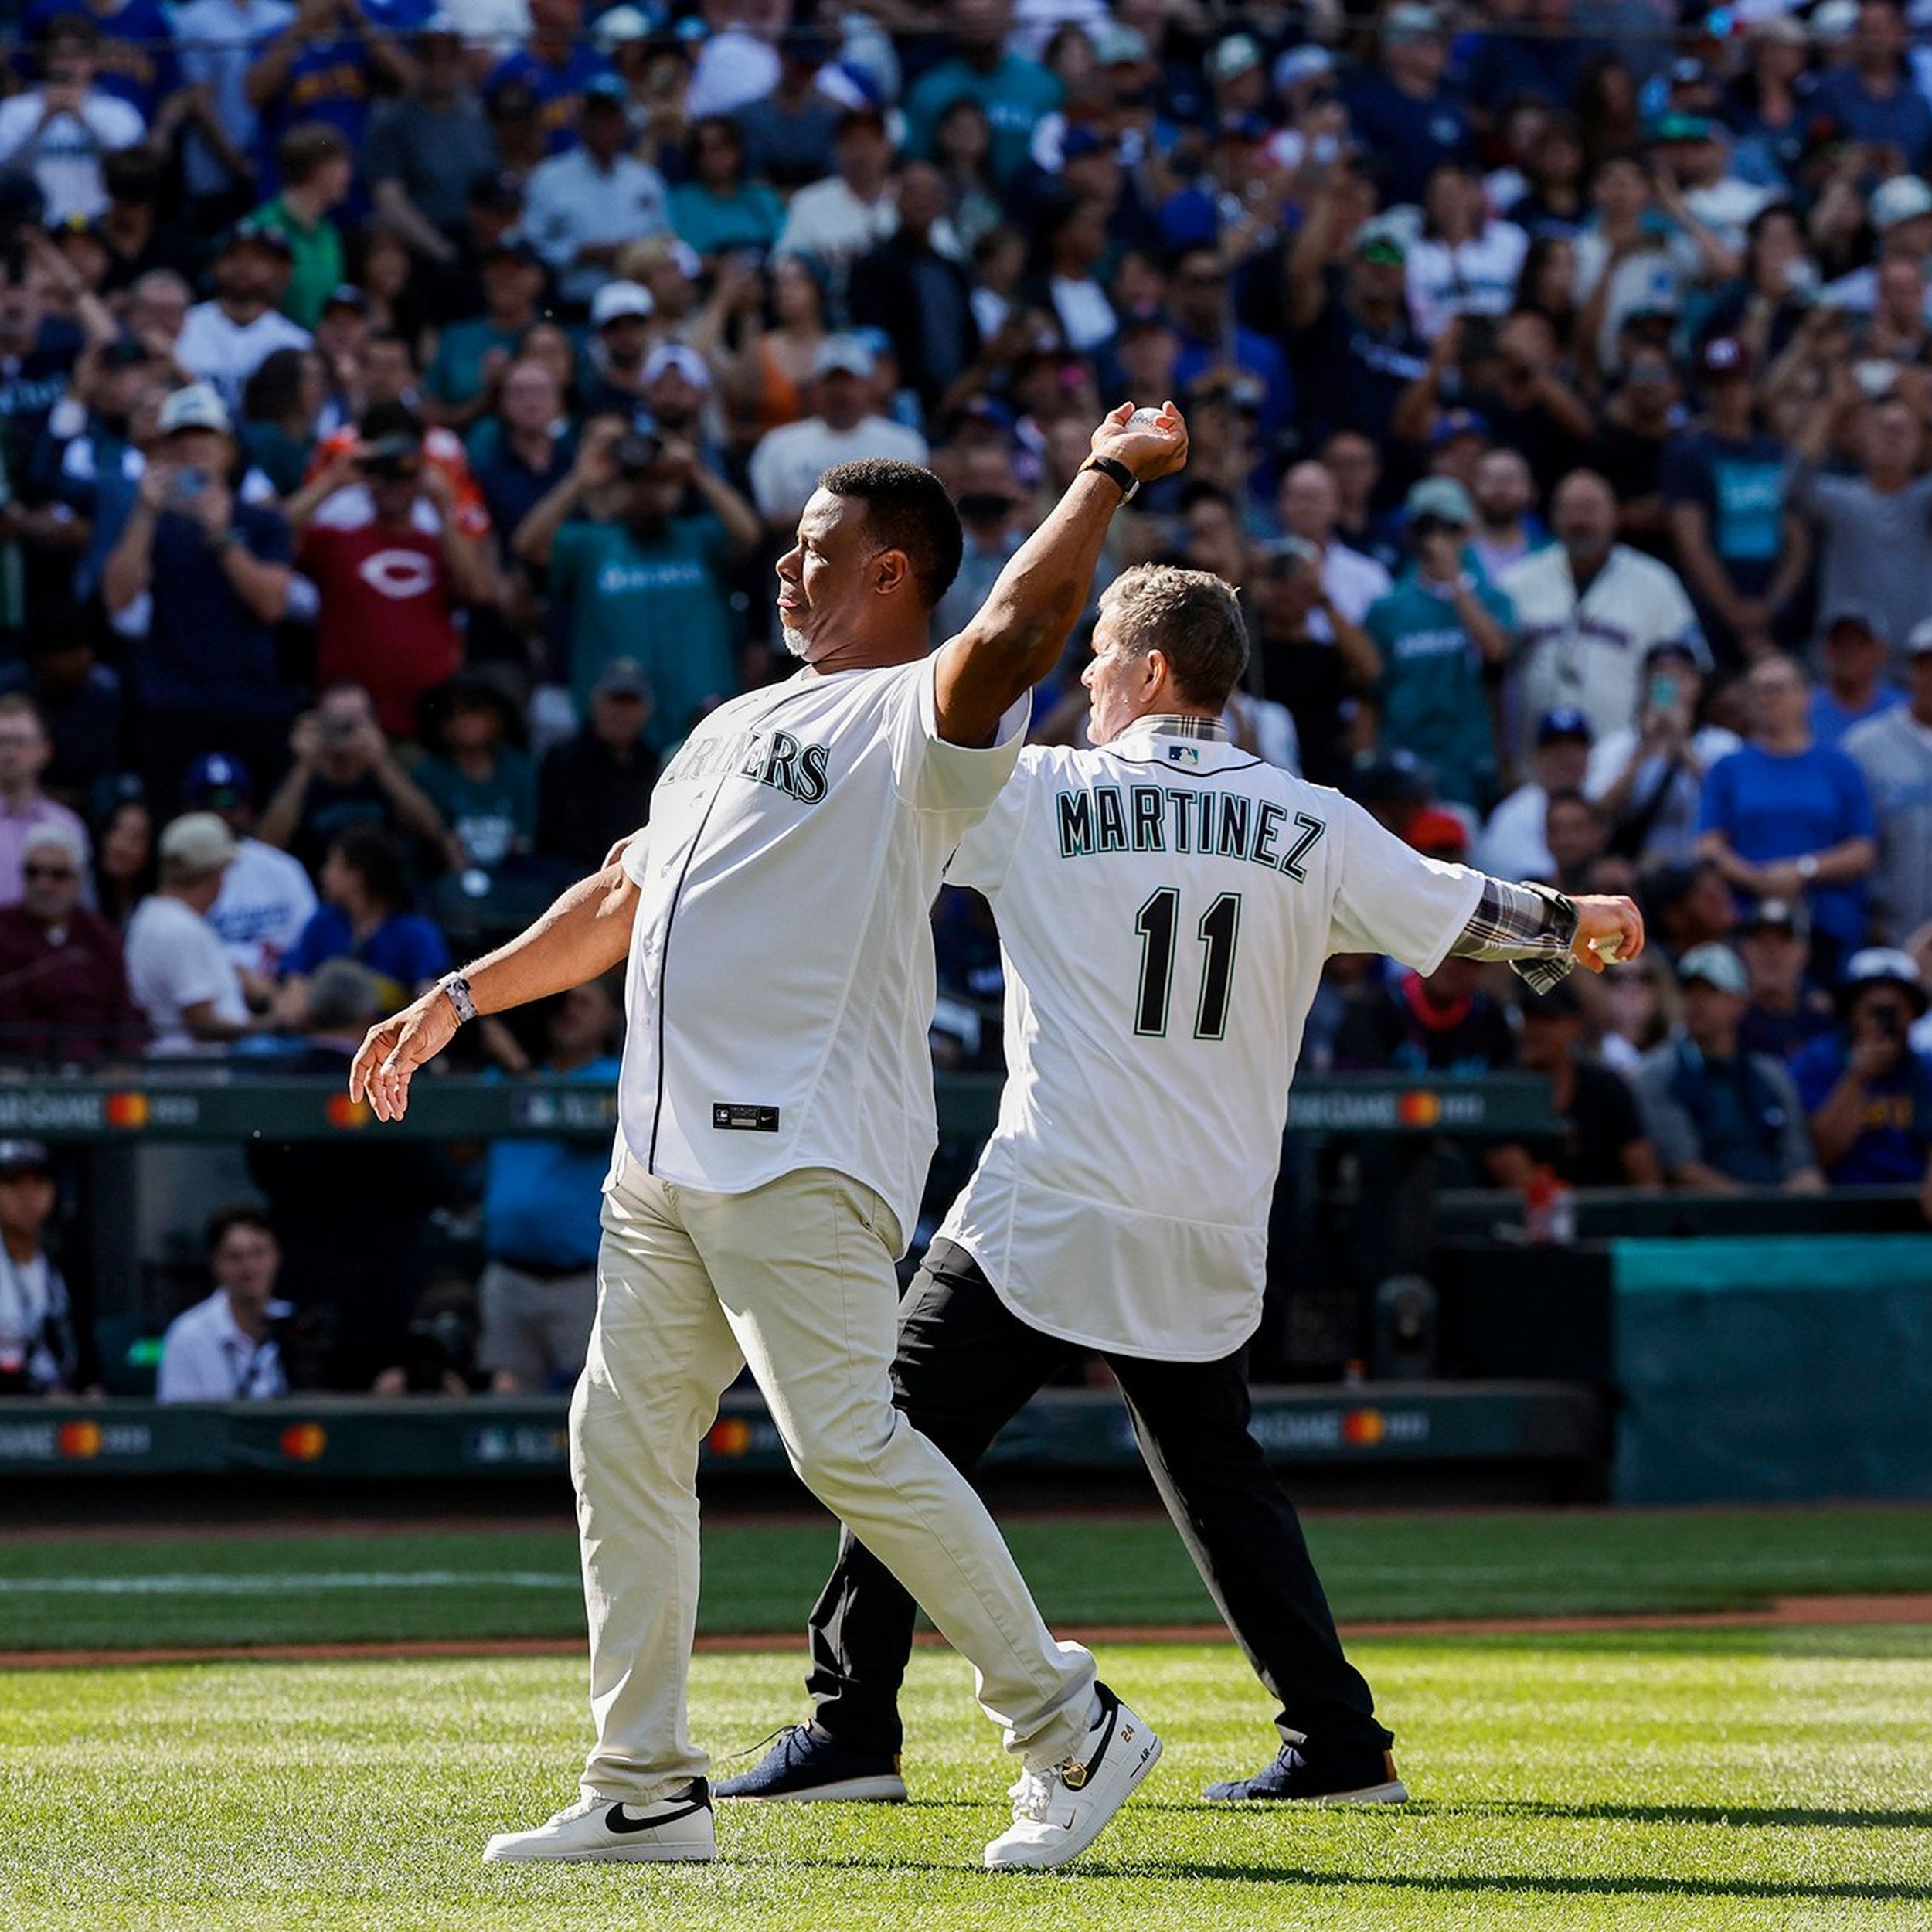 PHOTOS: Bobby Wagner Throws Out Ceremonial First Pitch At Mariners